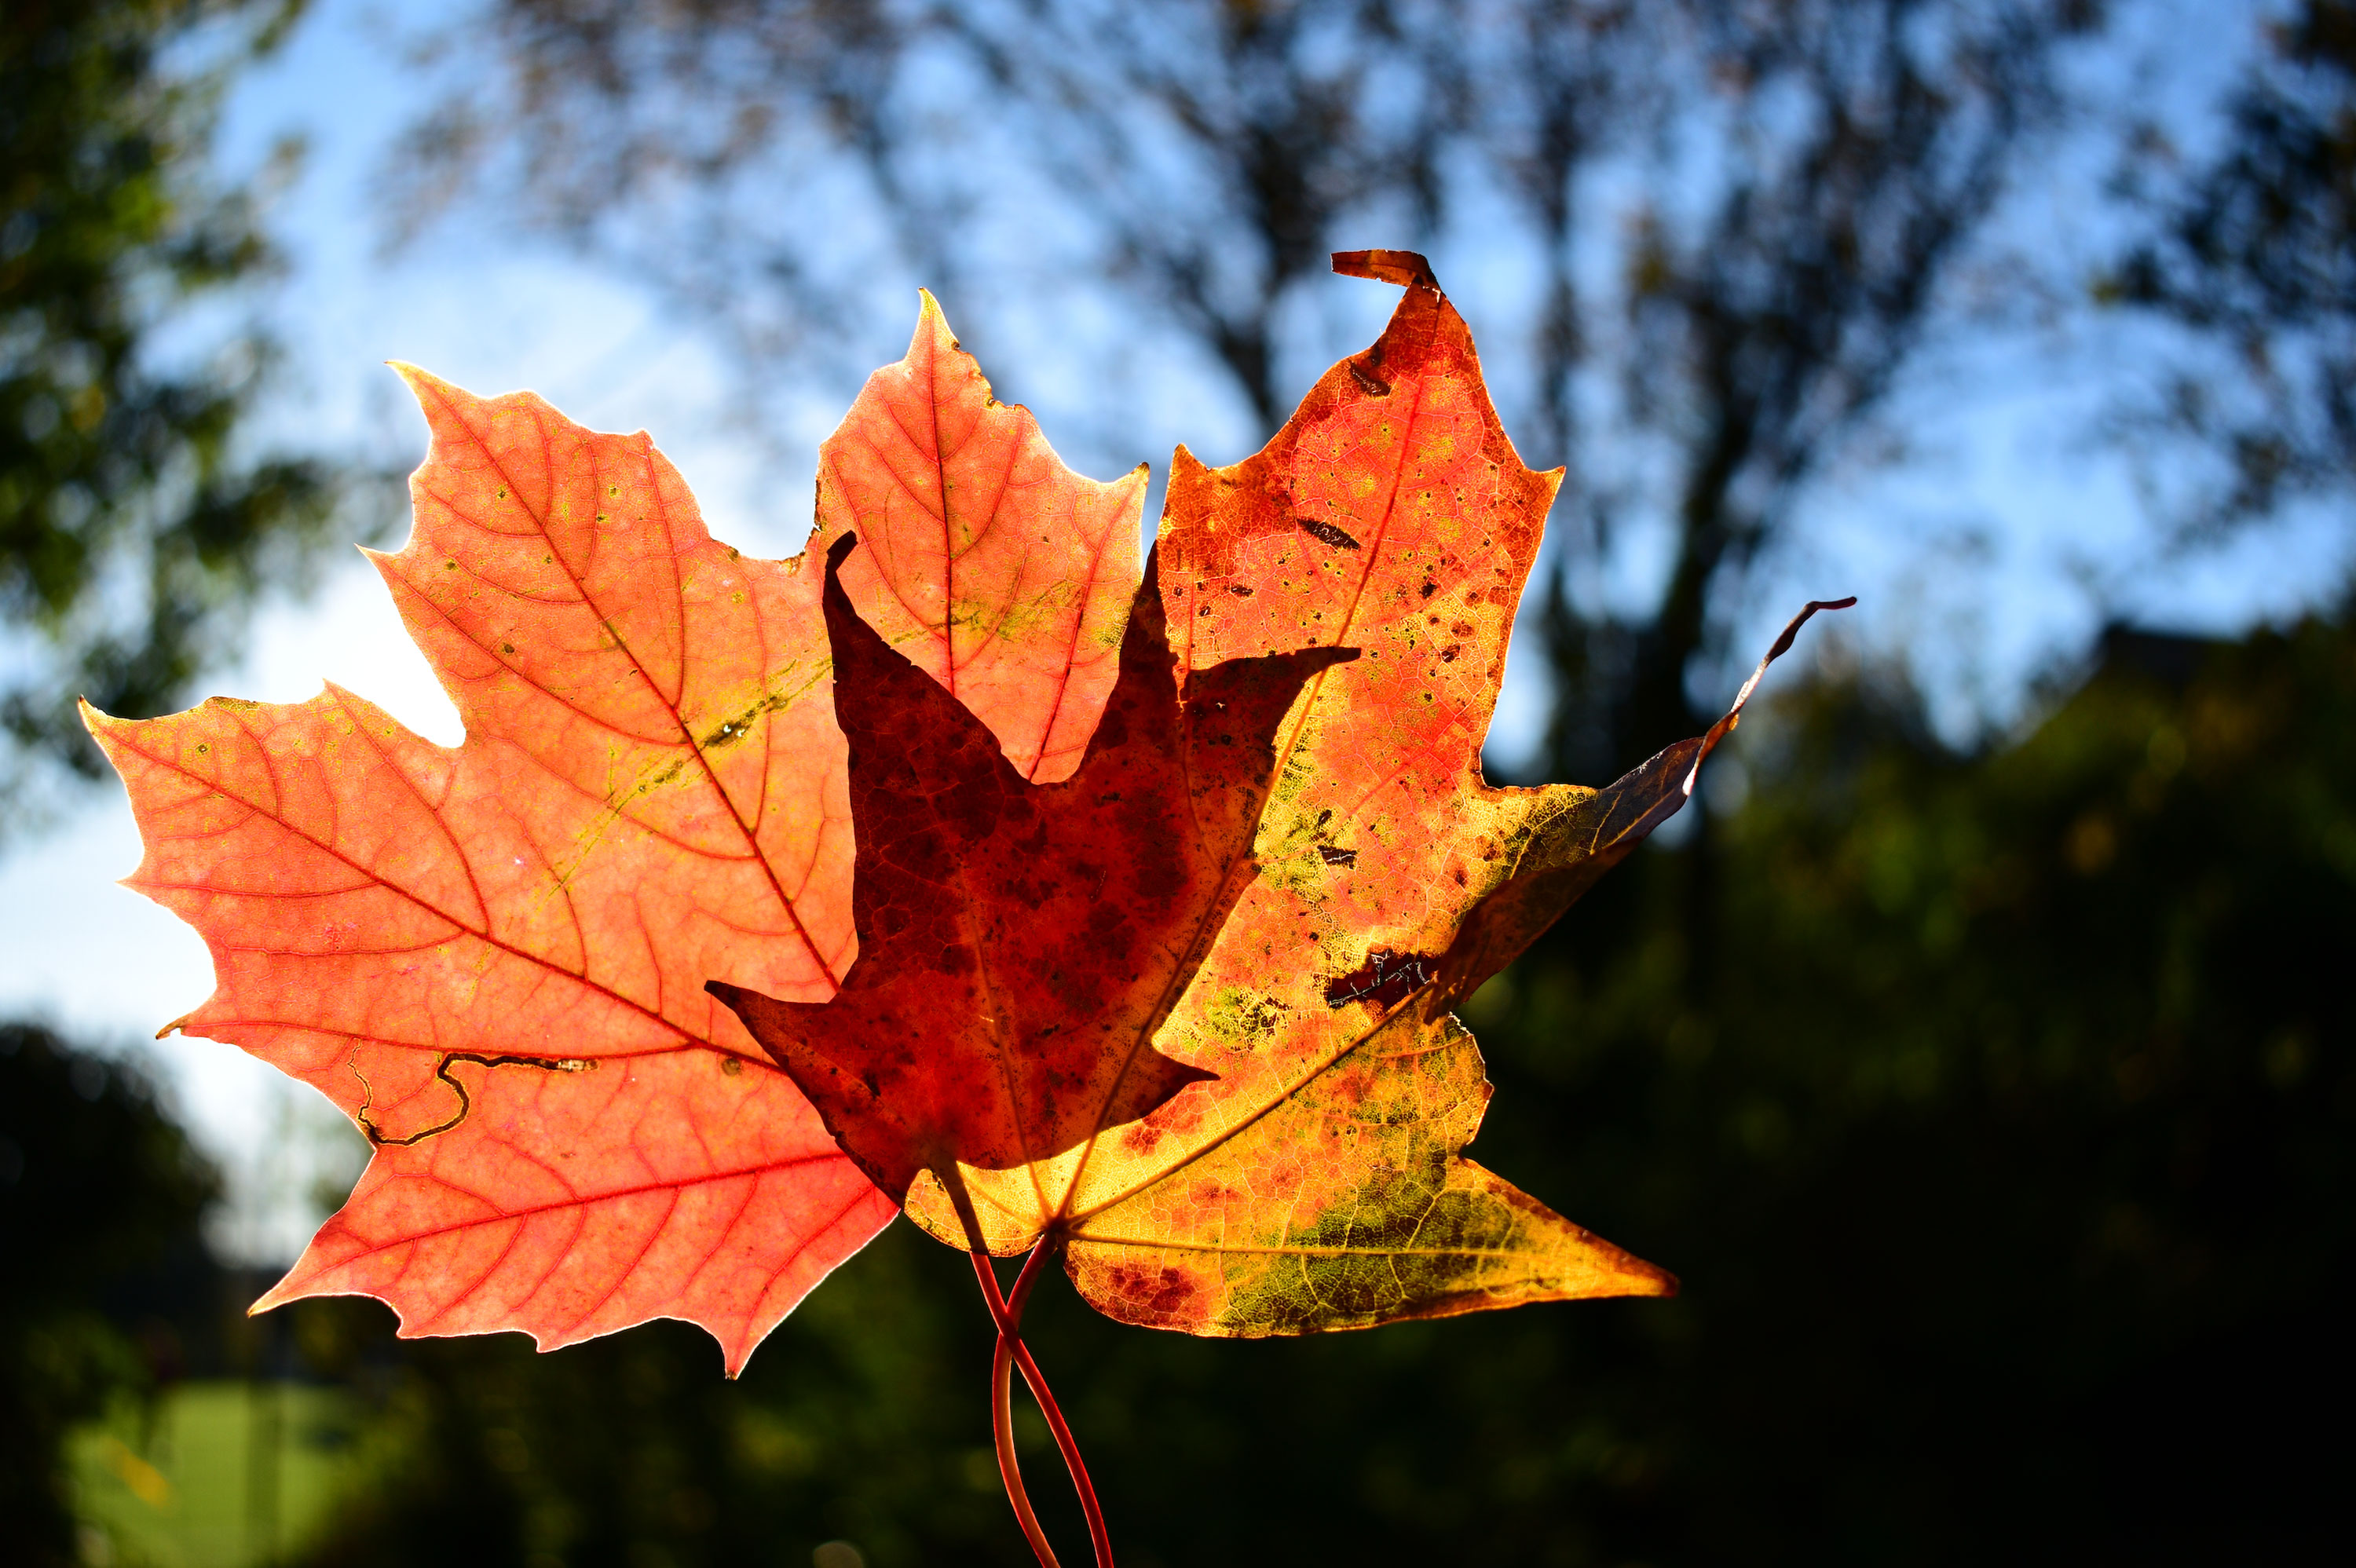 The first signs of autumn - Countryfile.com